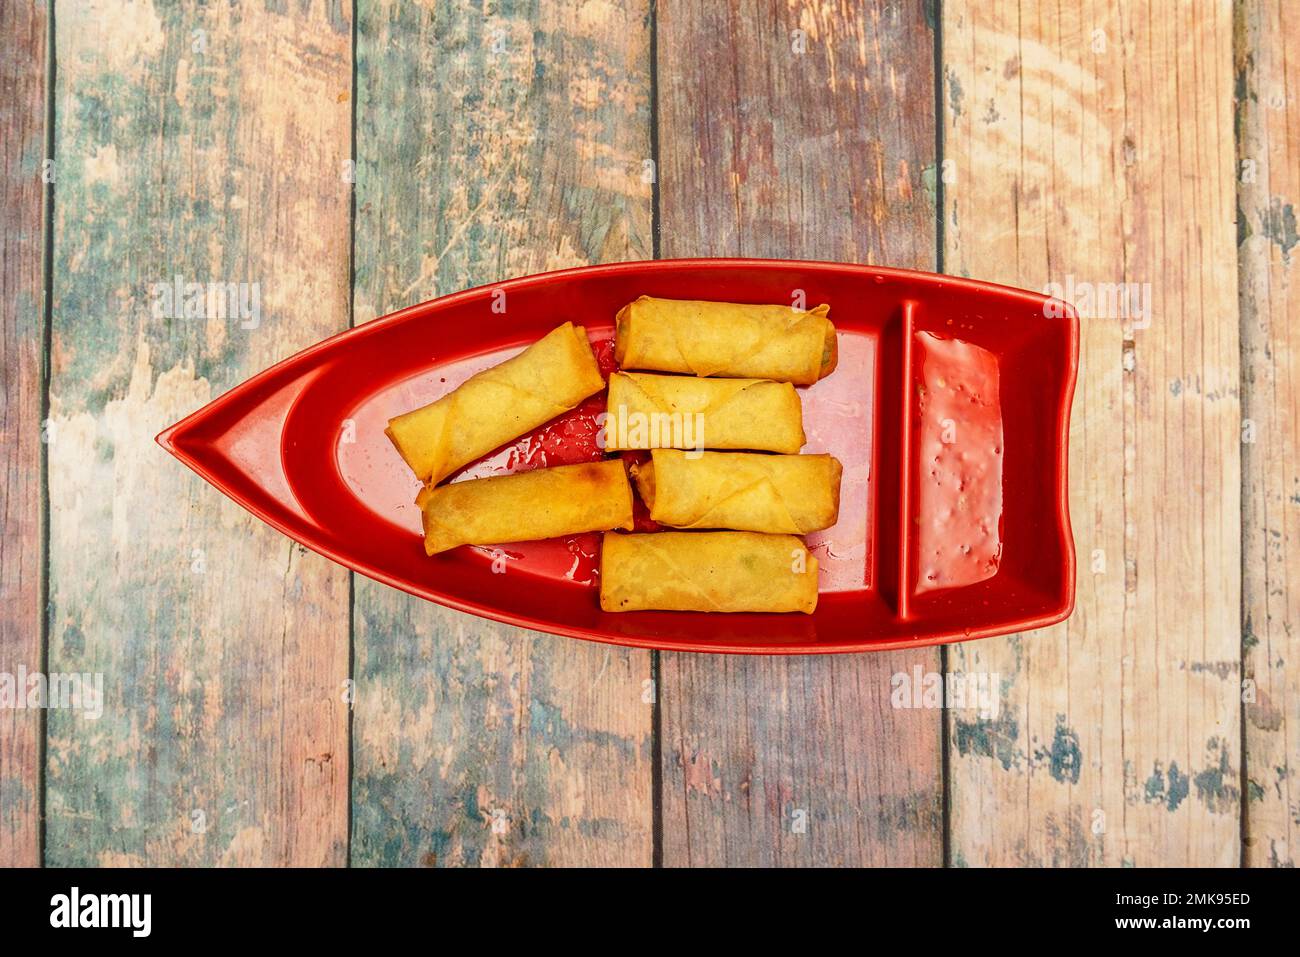 Fried Vietnamese spring rolls on a boat-shaped tray Stock Photo